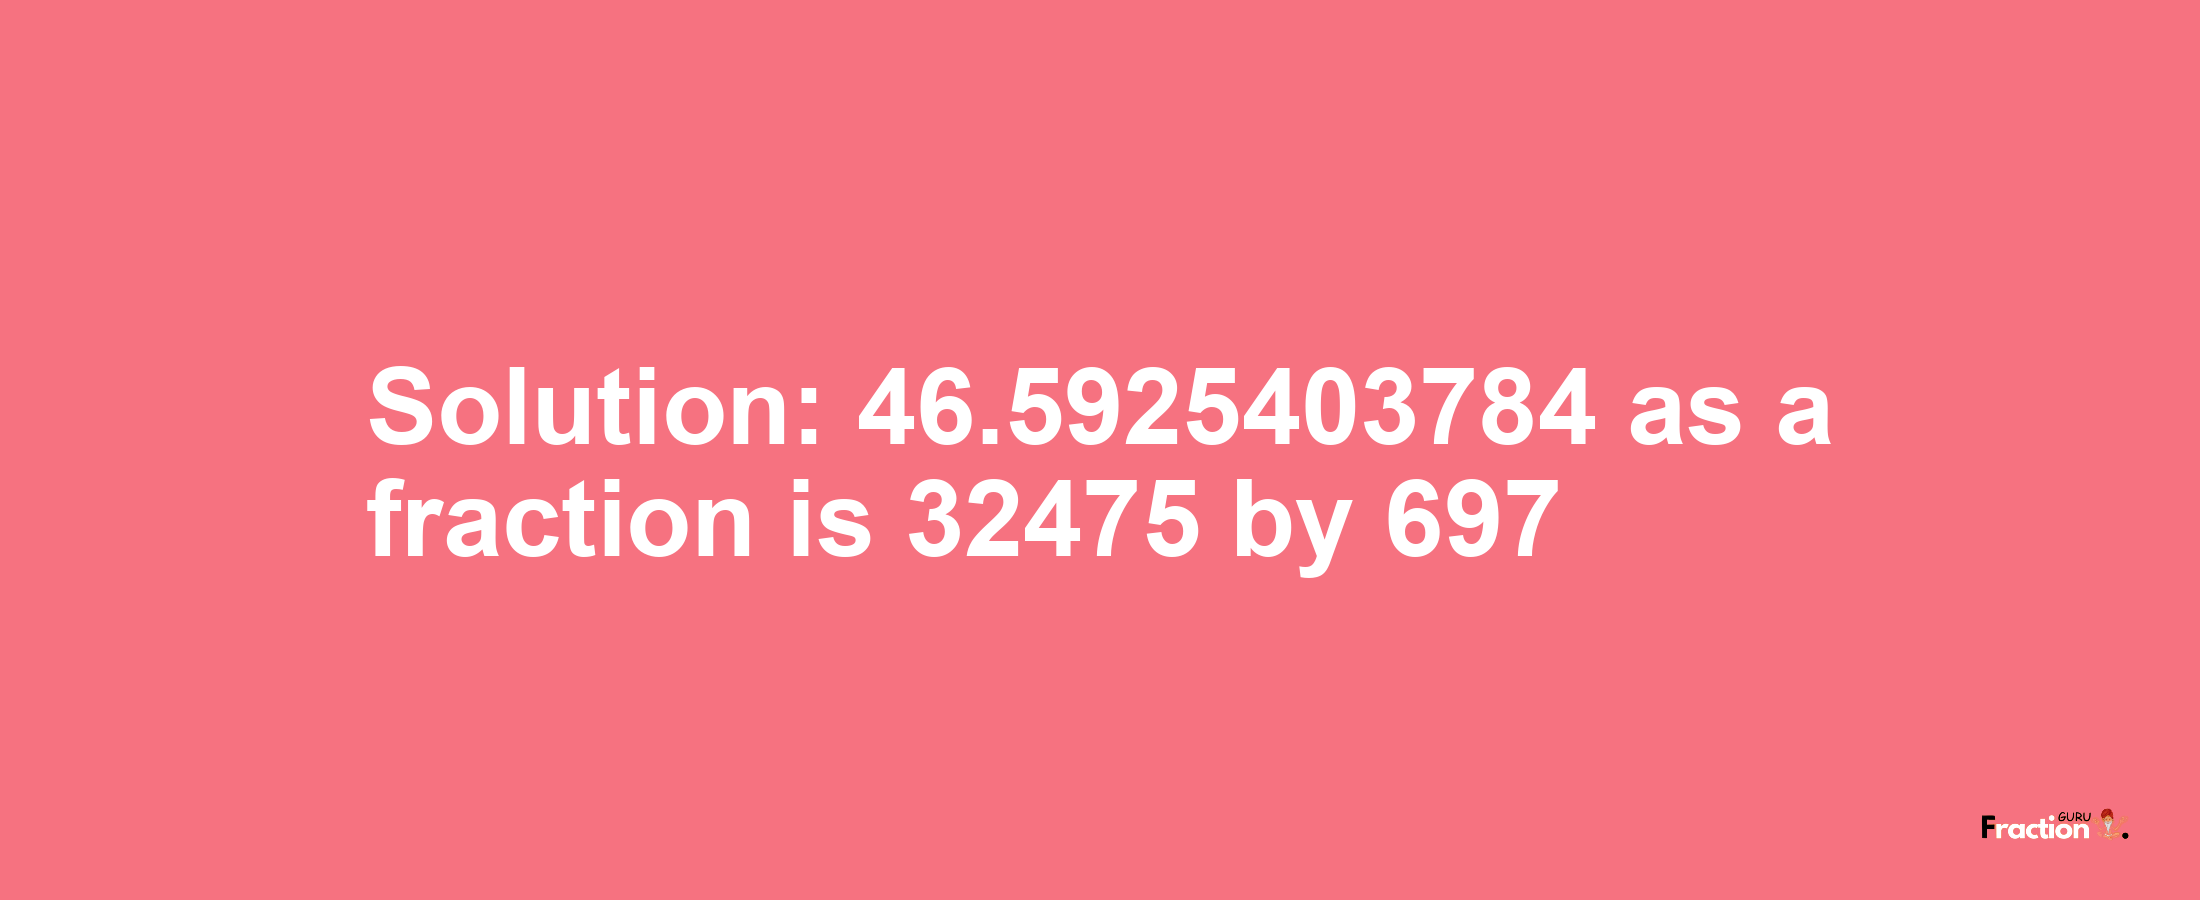 Solution:46.5925403784 as a fraction is 32475/697